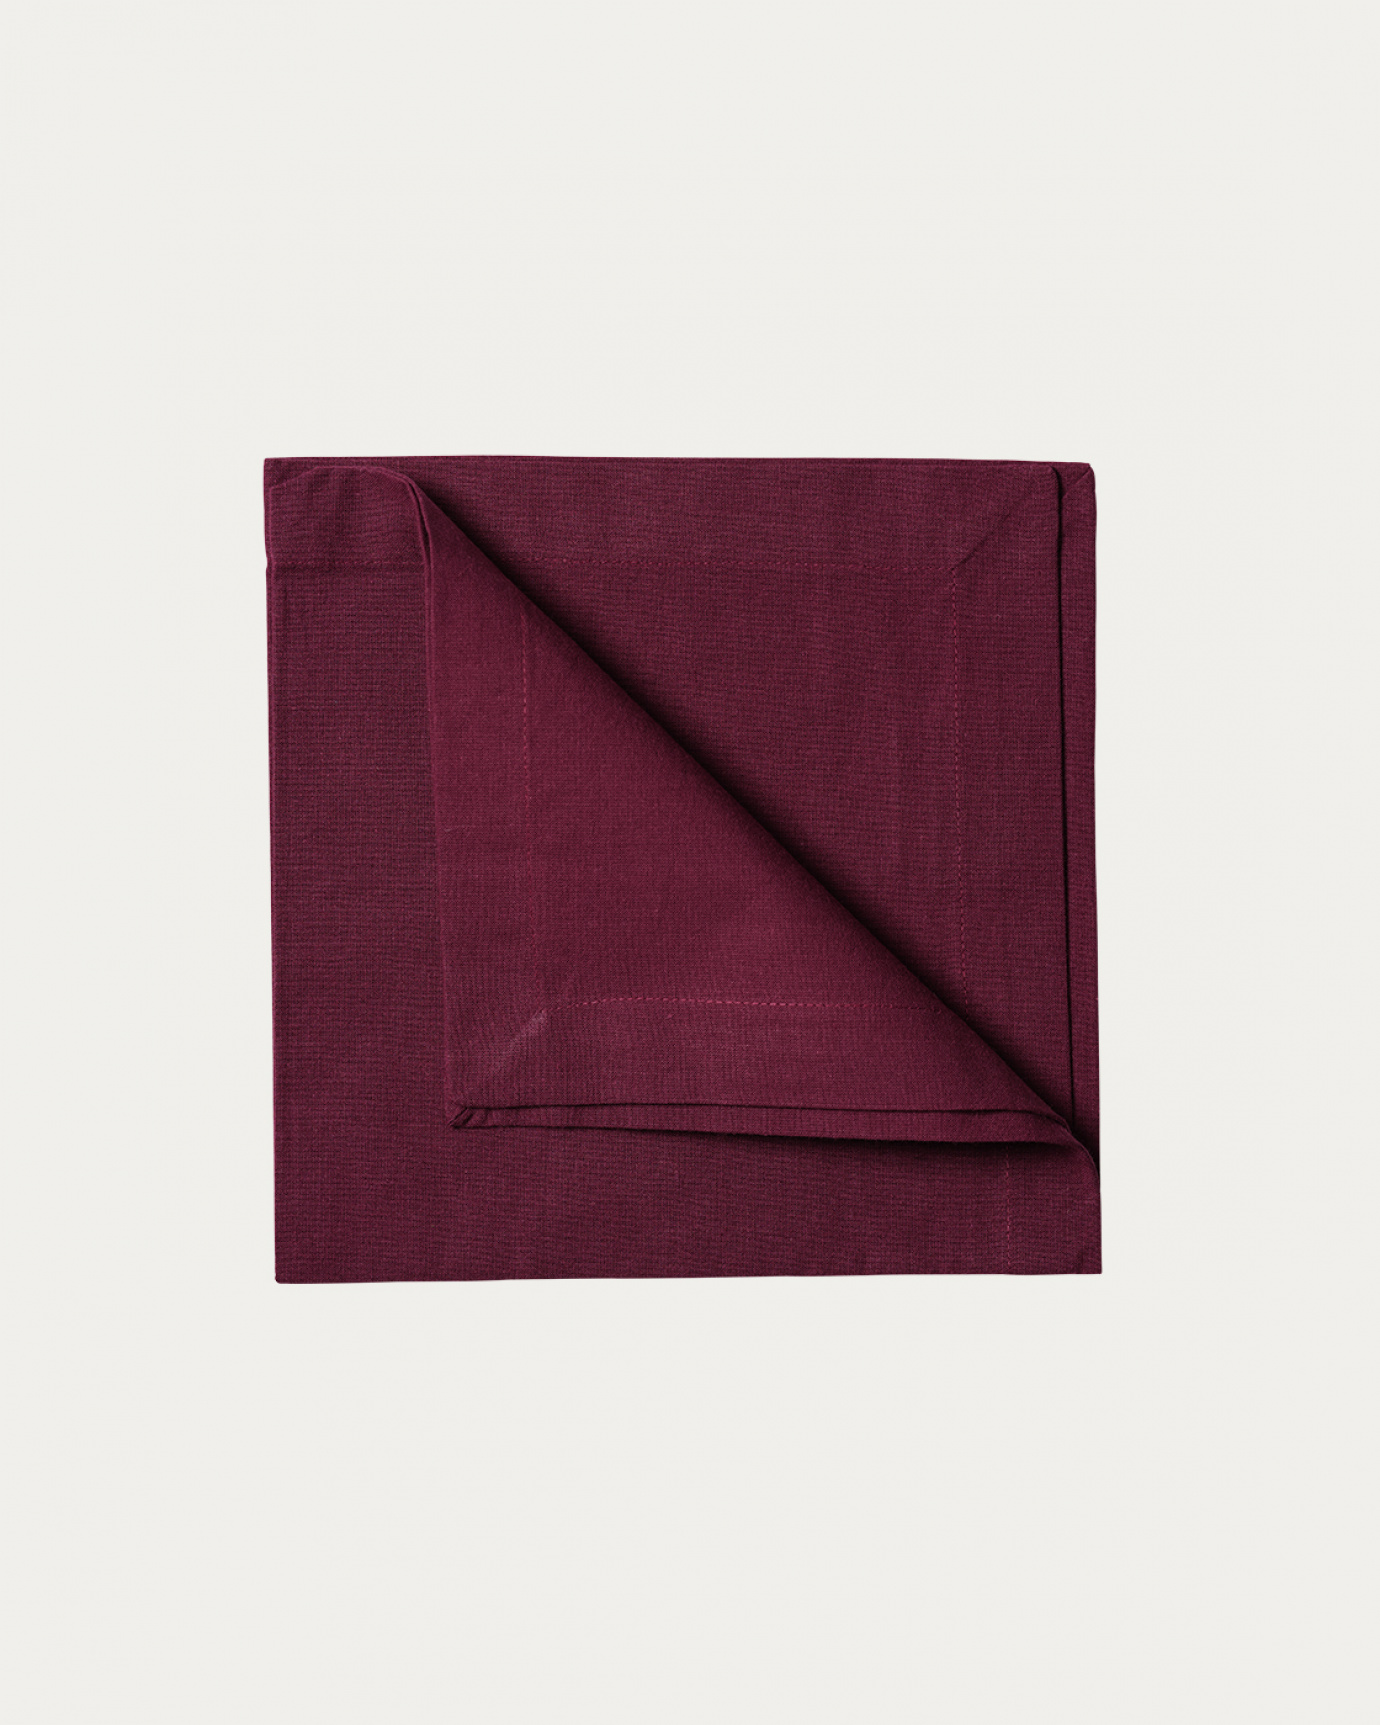 Product image burgundy red ROBERT napkin made of soft cotton from LINUM DESIGN. Size 45x45 cm and sold in 4-pack.